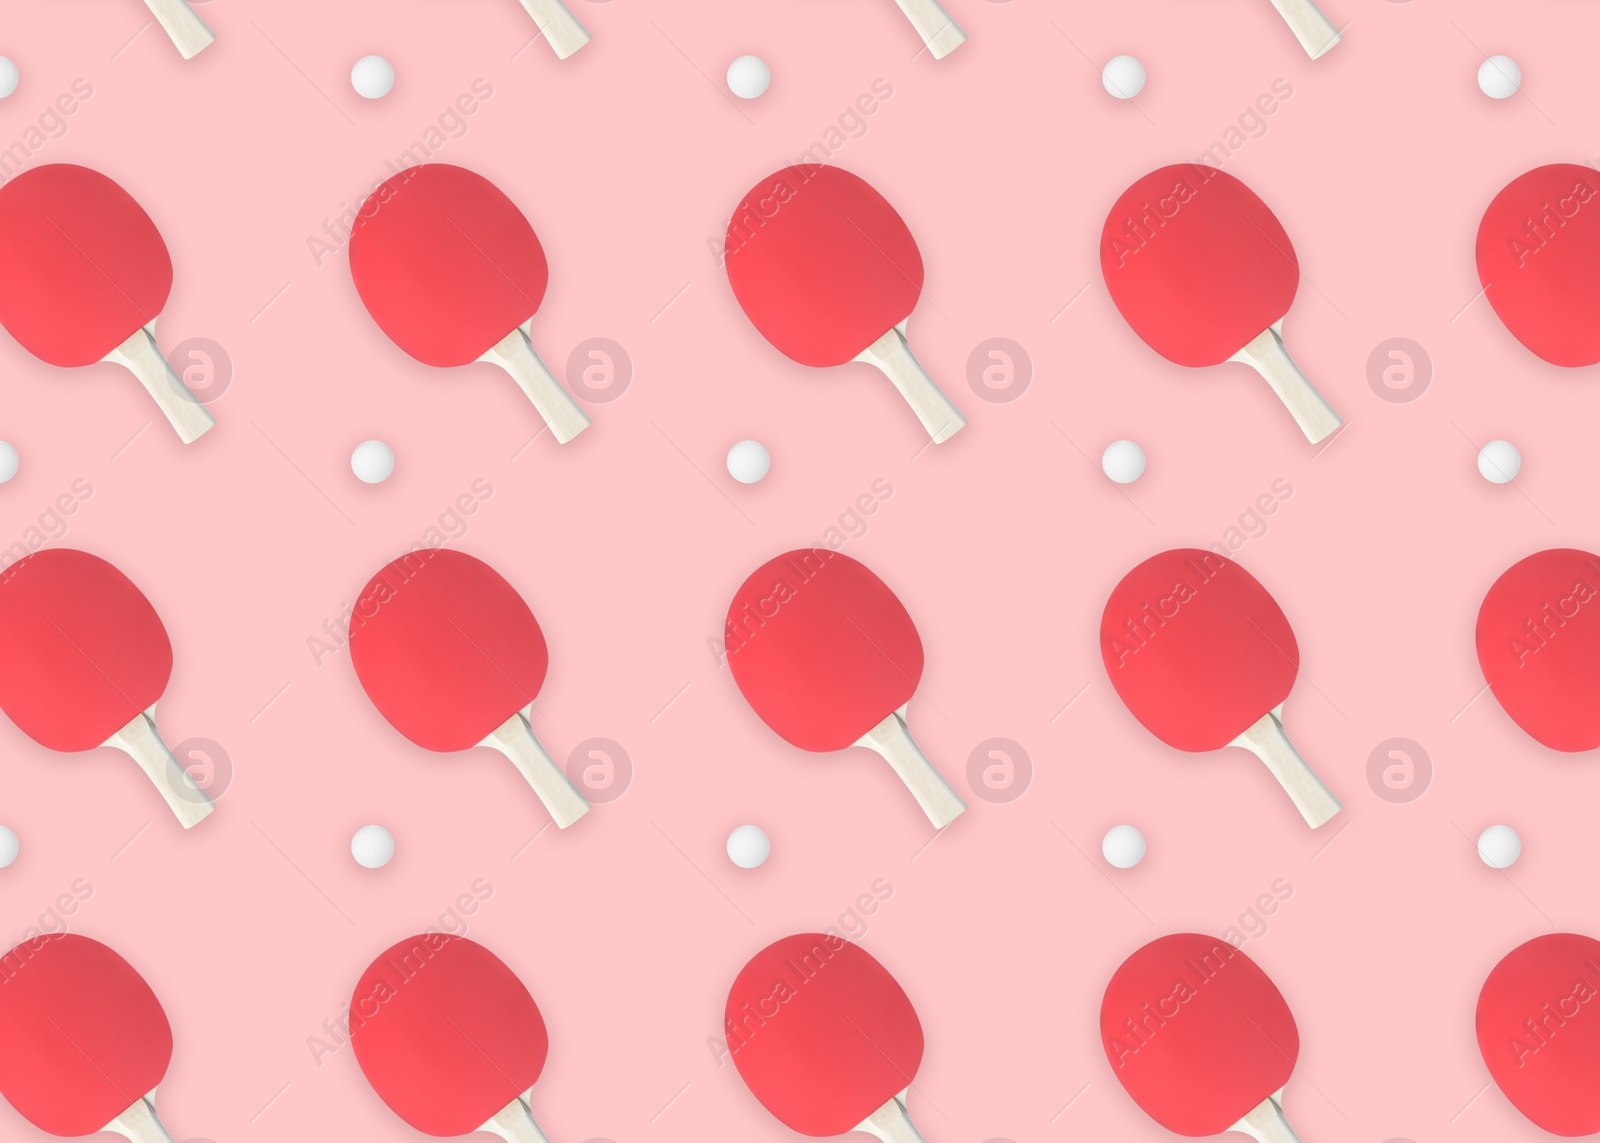 Image of Table tennis paddles and balls on pink background, flat lay